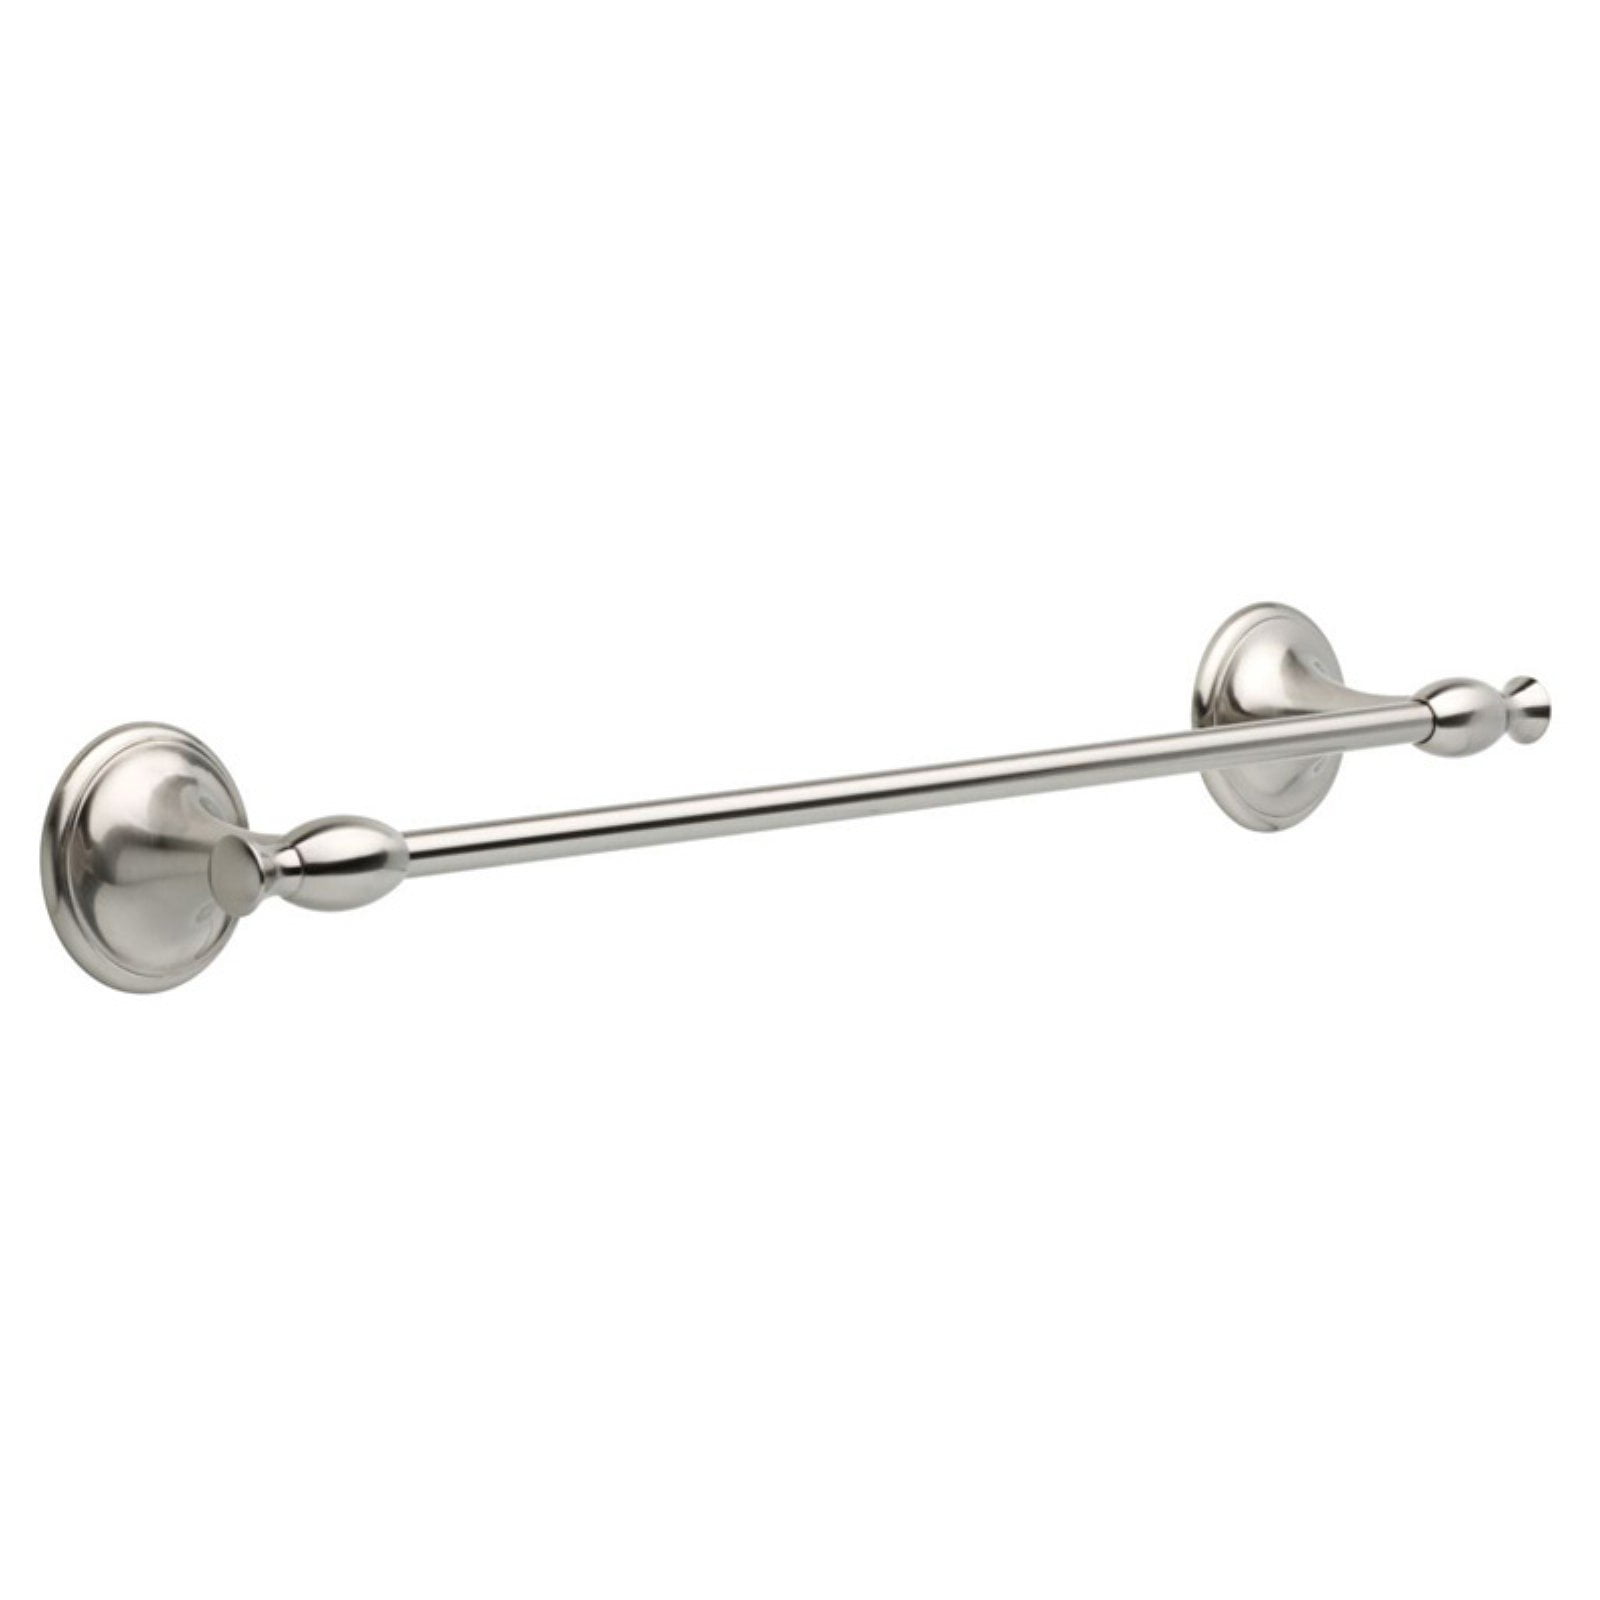 Delta Windemere 24 in Towel Bar in Stainless phoebe collection brushed nickel 